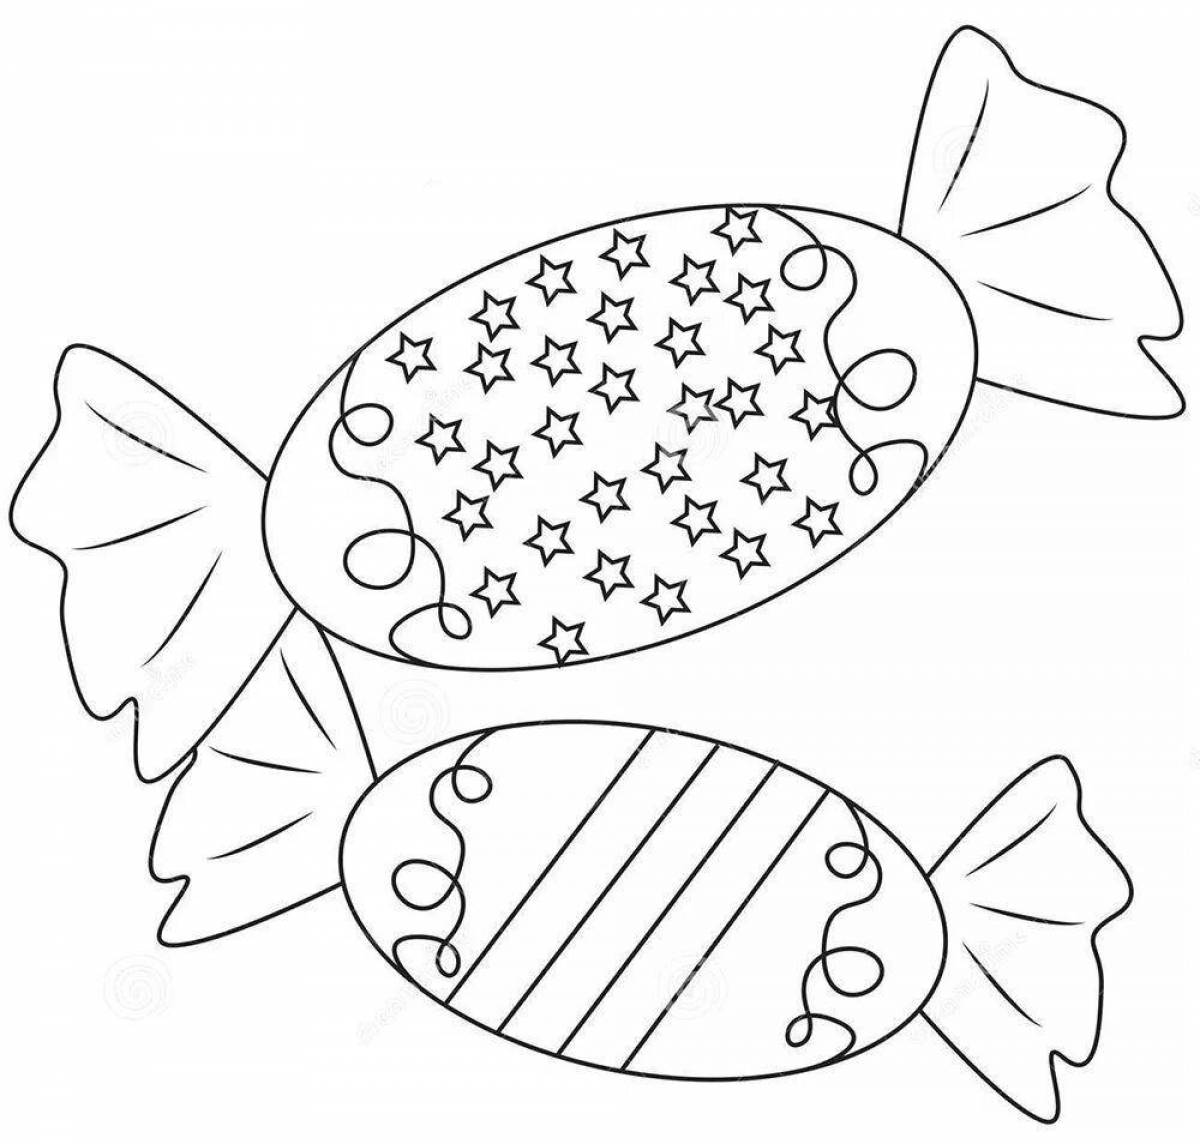 Tempting candy coloring page for kids